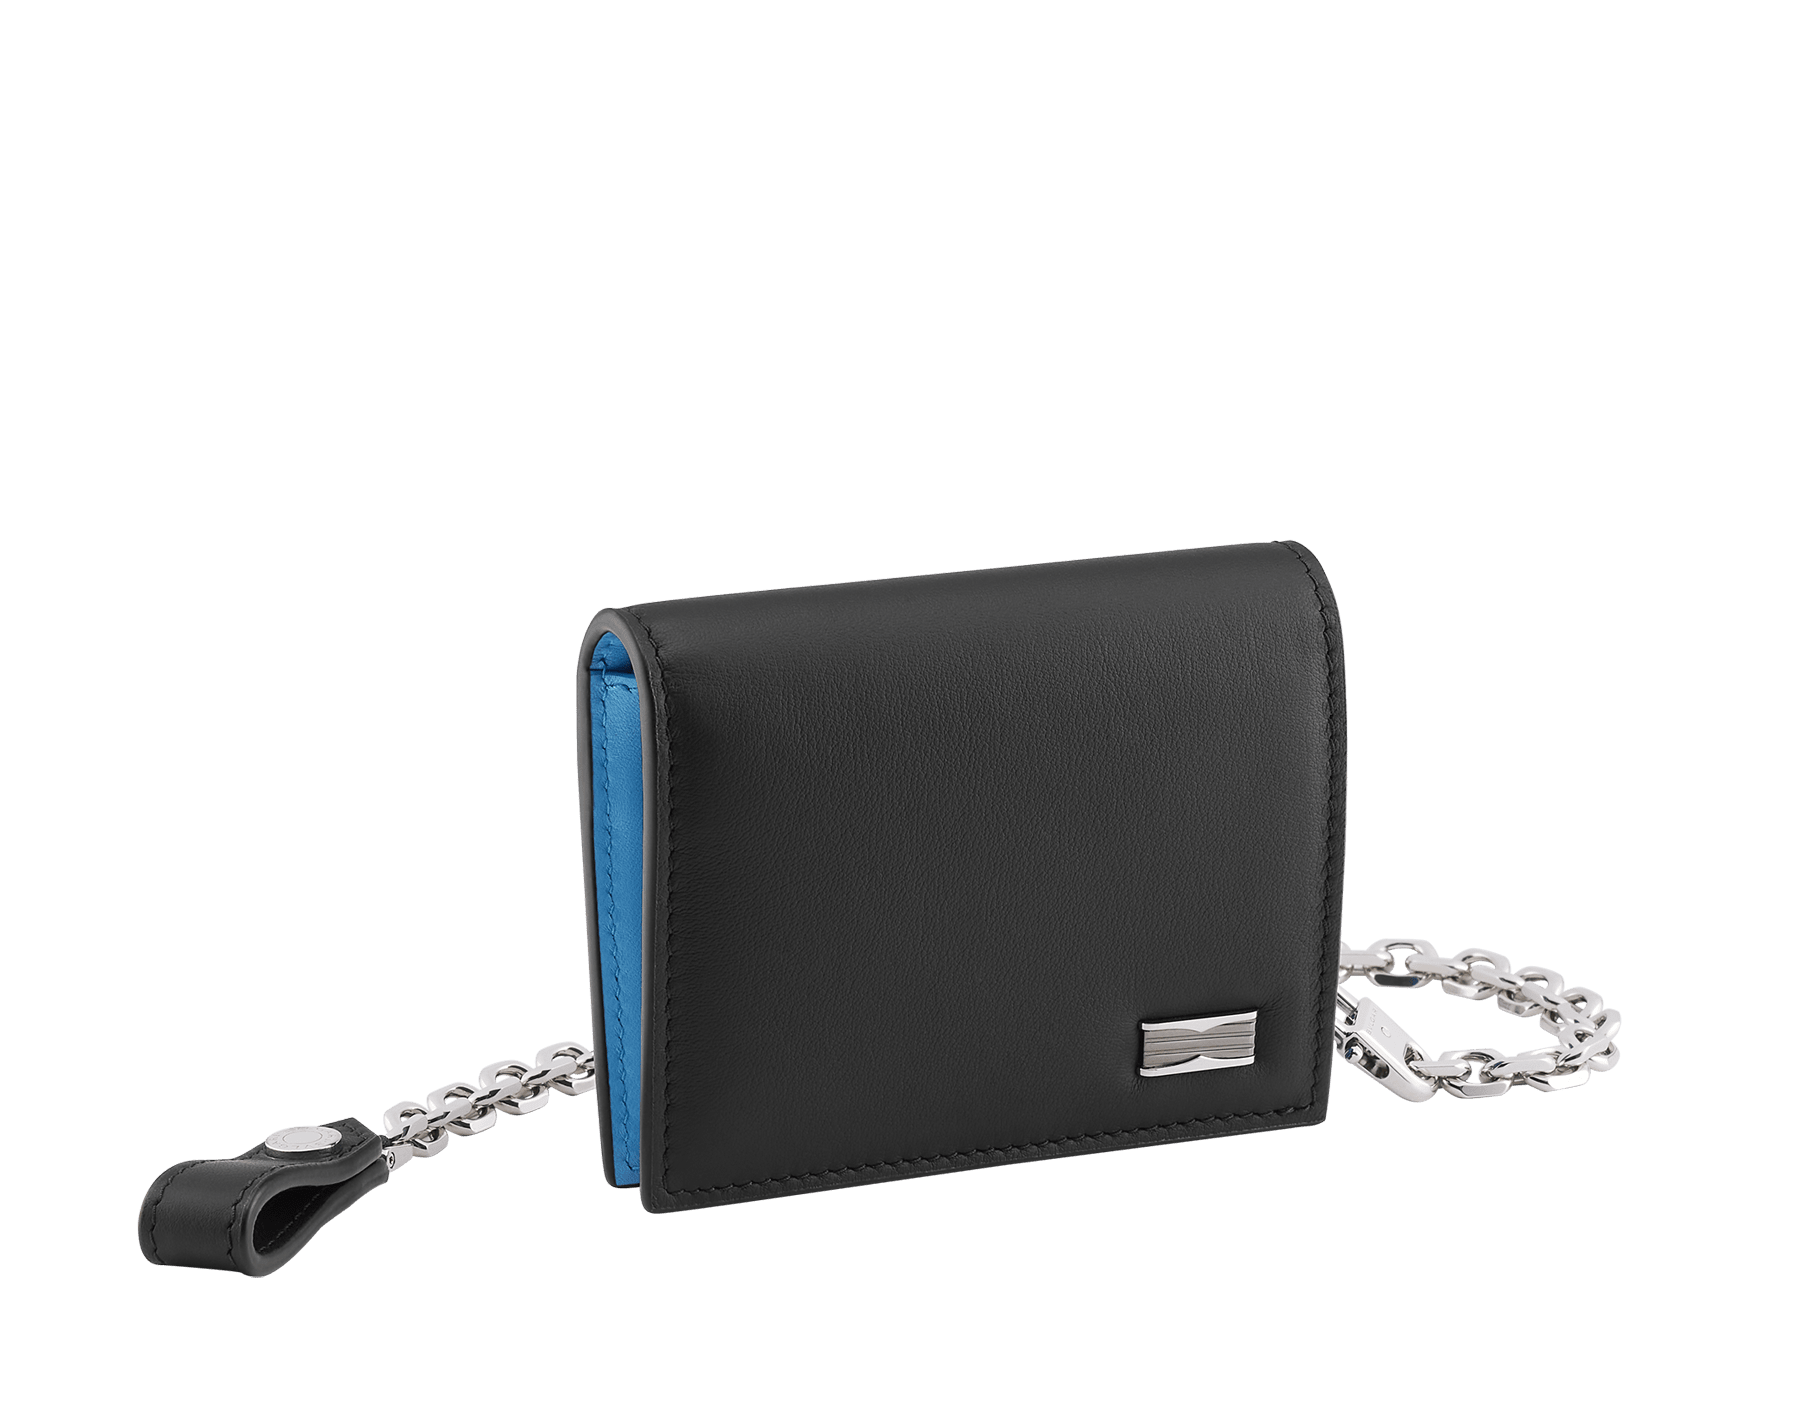 B.zero1 Man compact wallet with chain in black matte calf leather with Niagara sapphire blue nappa leather interior. Iconic dark ruthenium and palladium-plated brass embellishment, and folded press-stud closure. BZM-COMPACTWALLET image 1